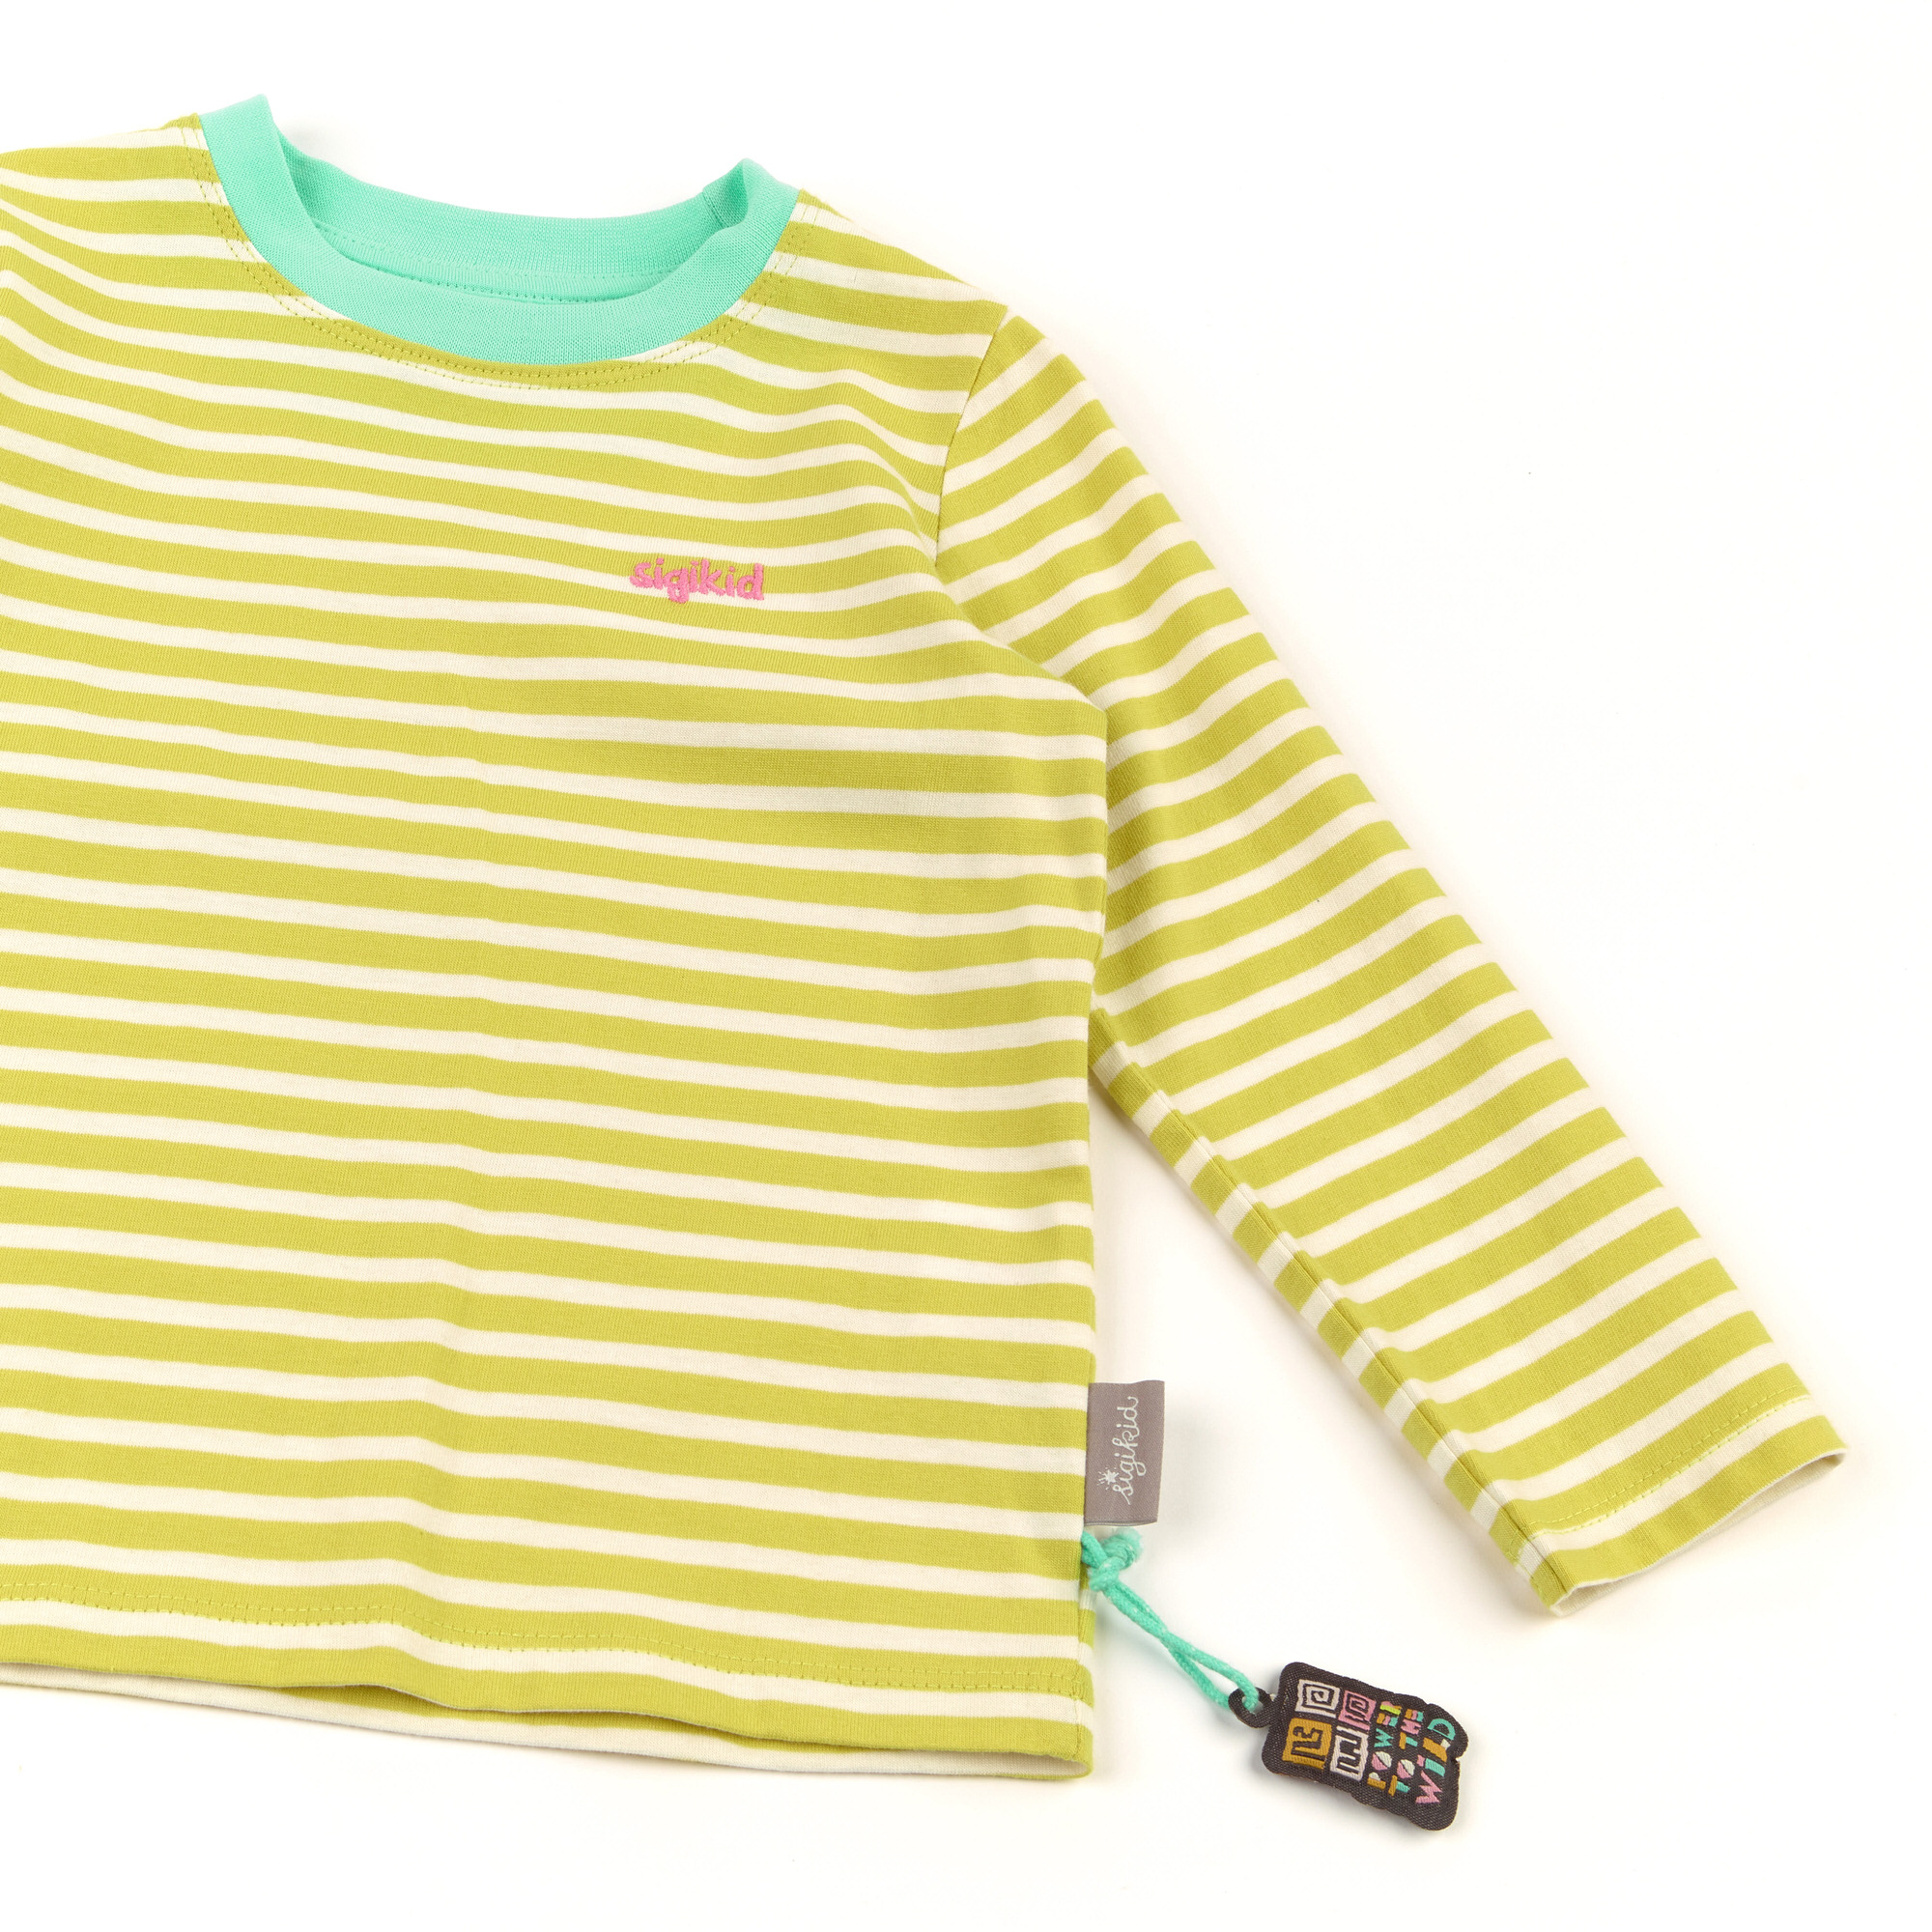 Casual long sleeve Tee for girls, white/yellow striped